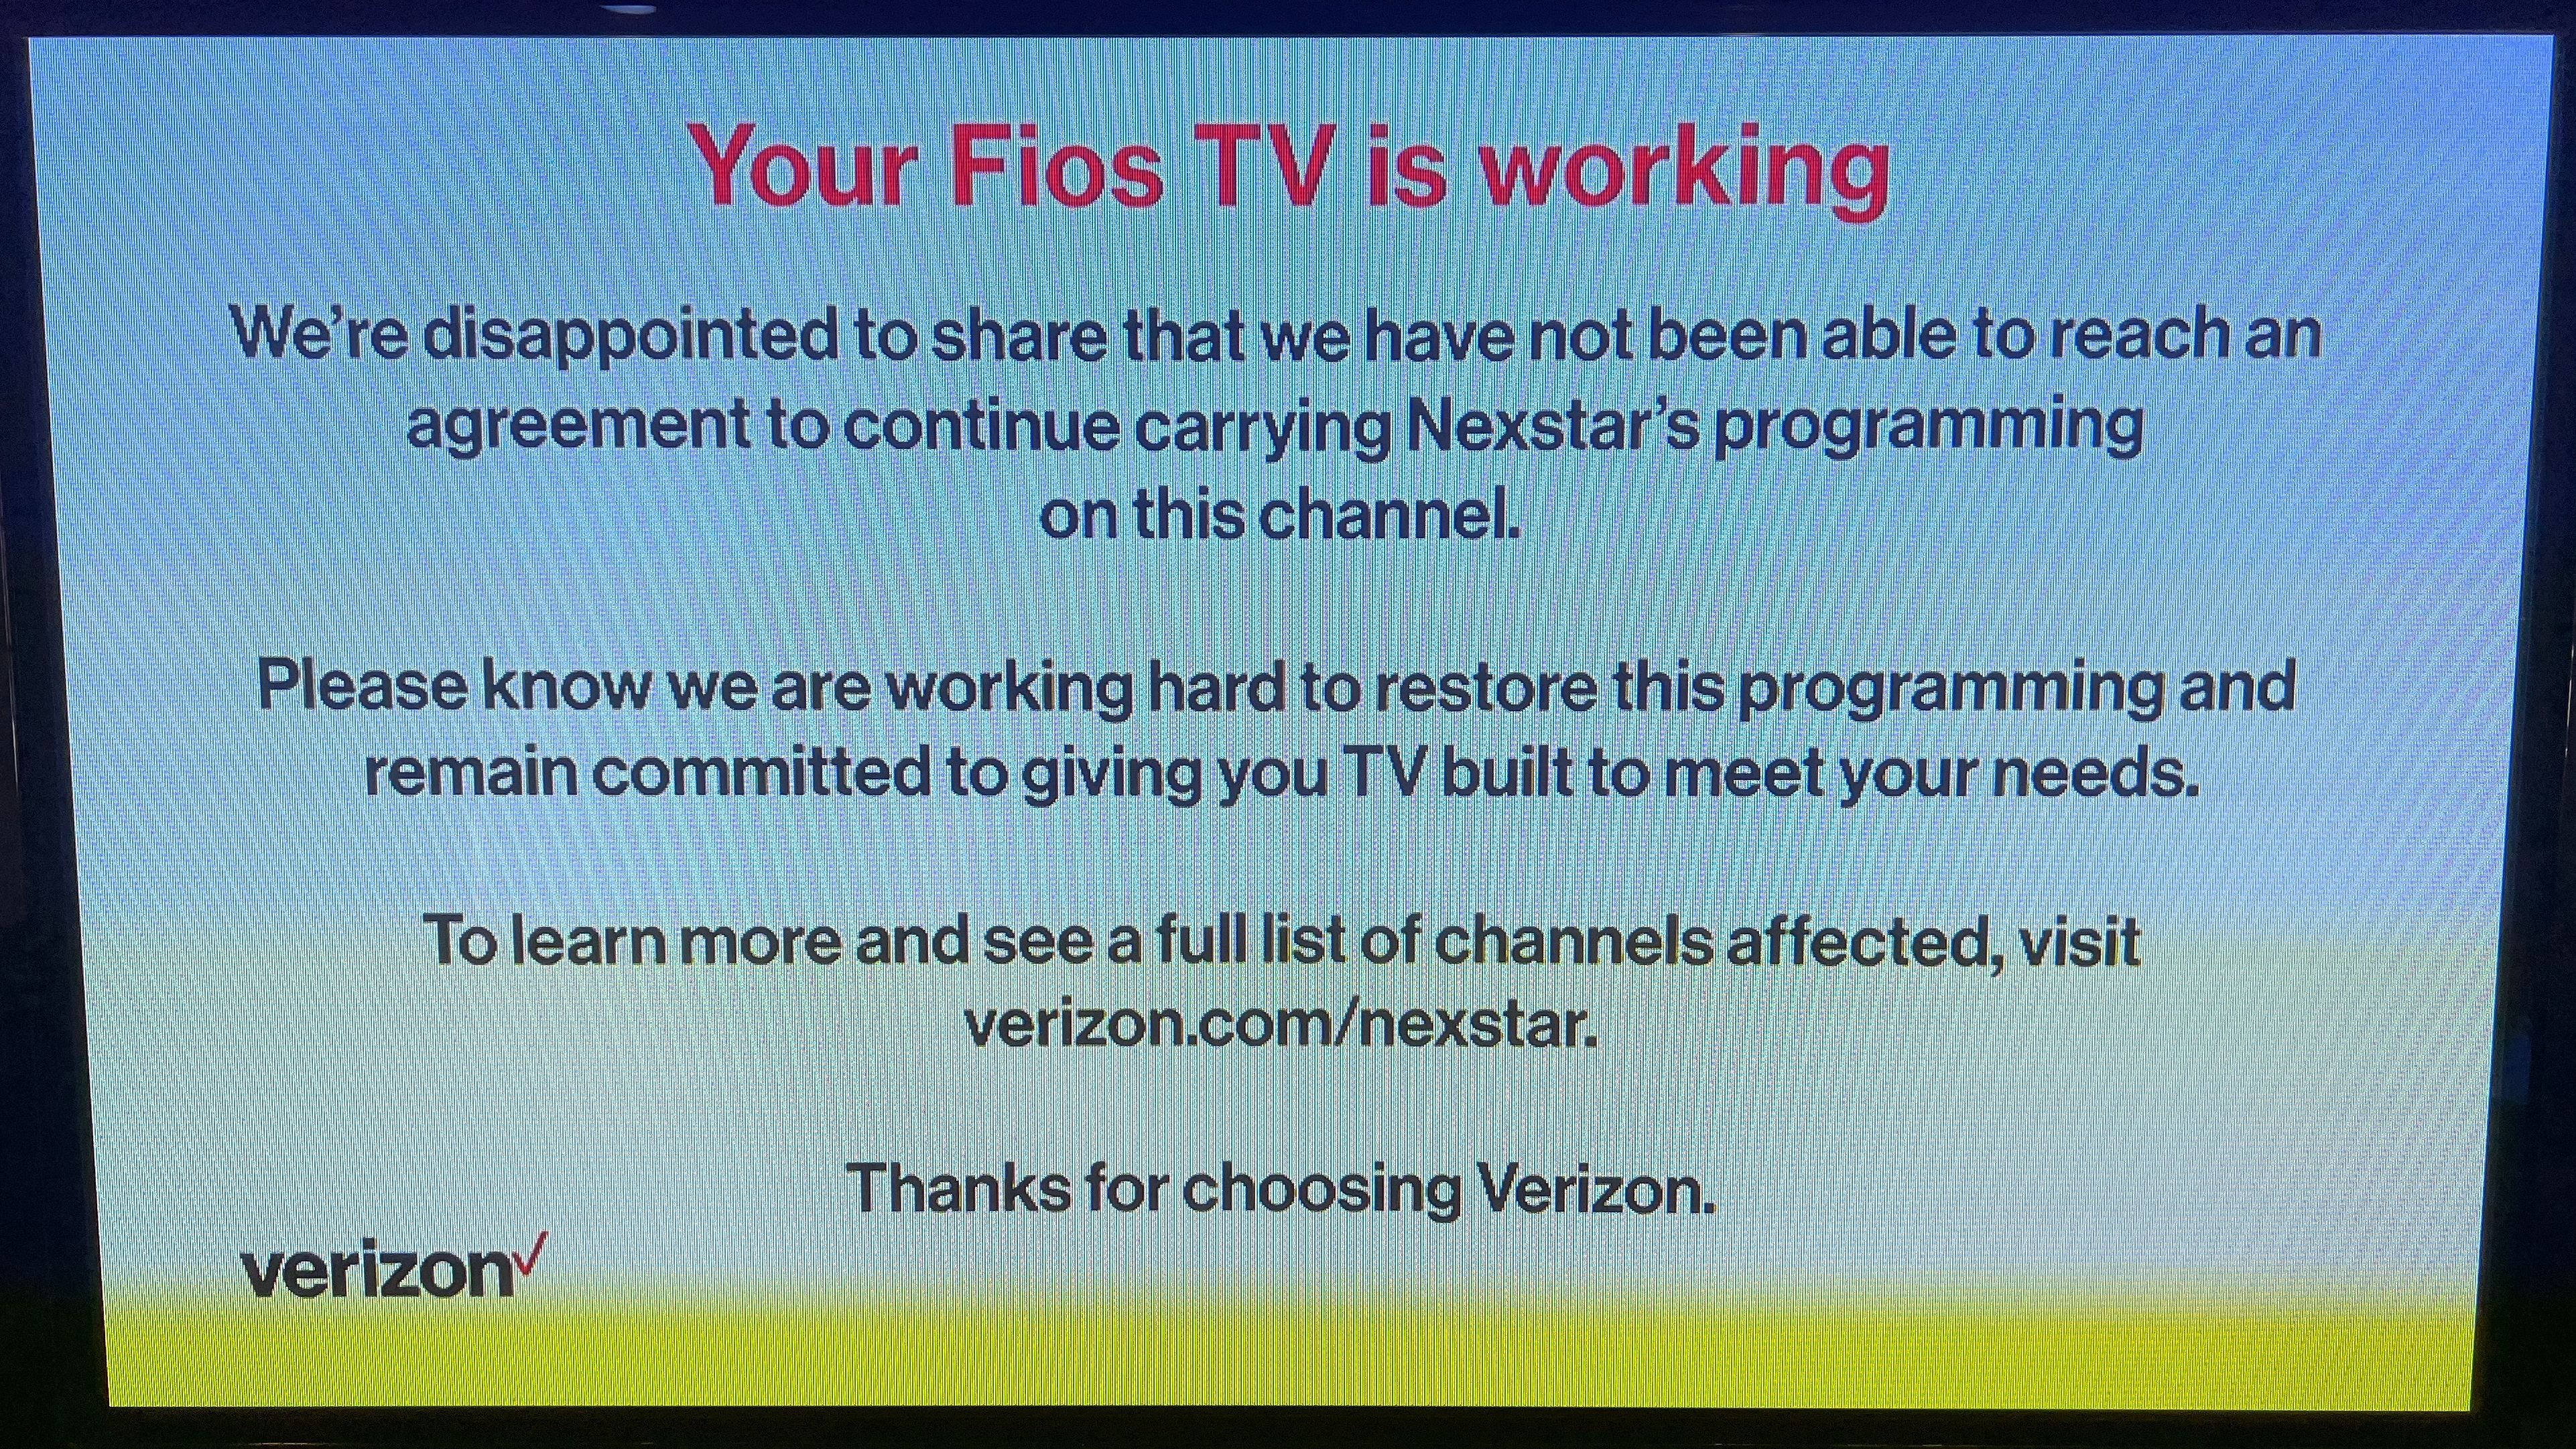 Verizon-Nexstar blackout ends, restoring Channel 12 to Fios customers in R.I.